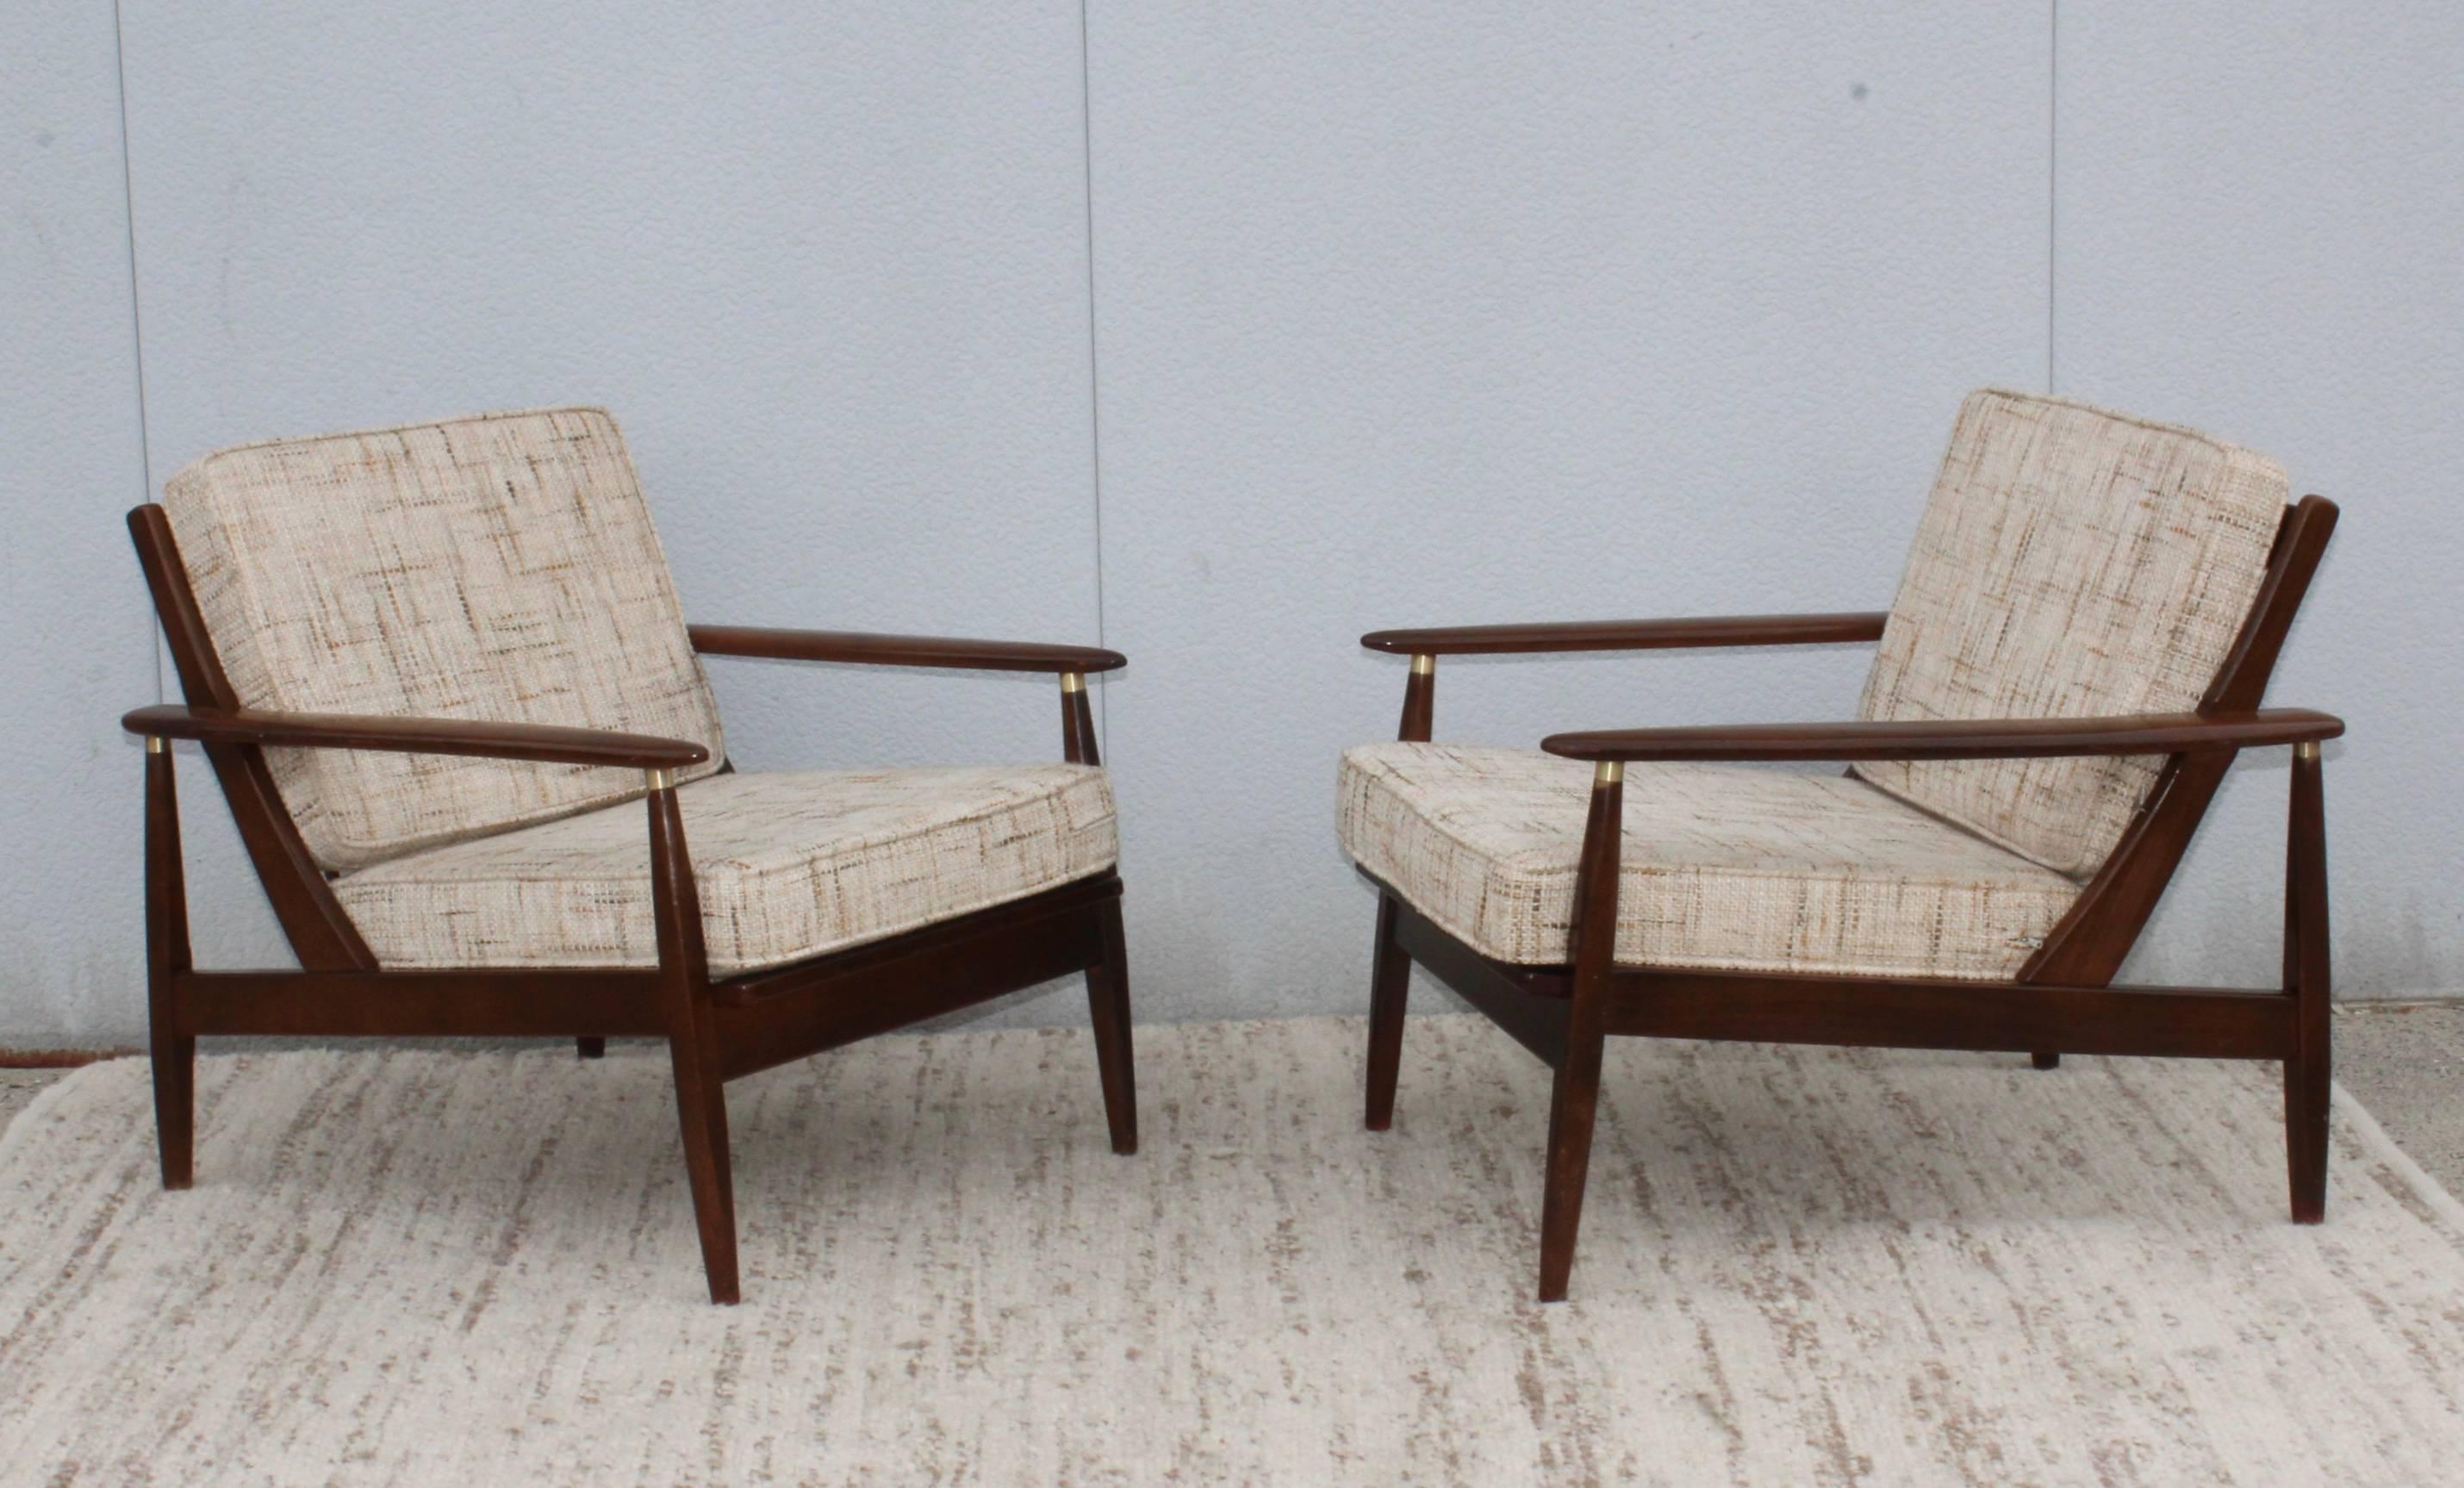 1960s modern walnut lounge chairs with brass detail.